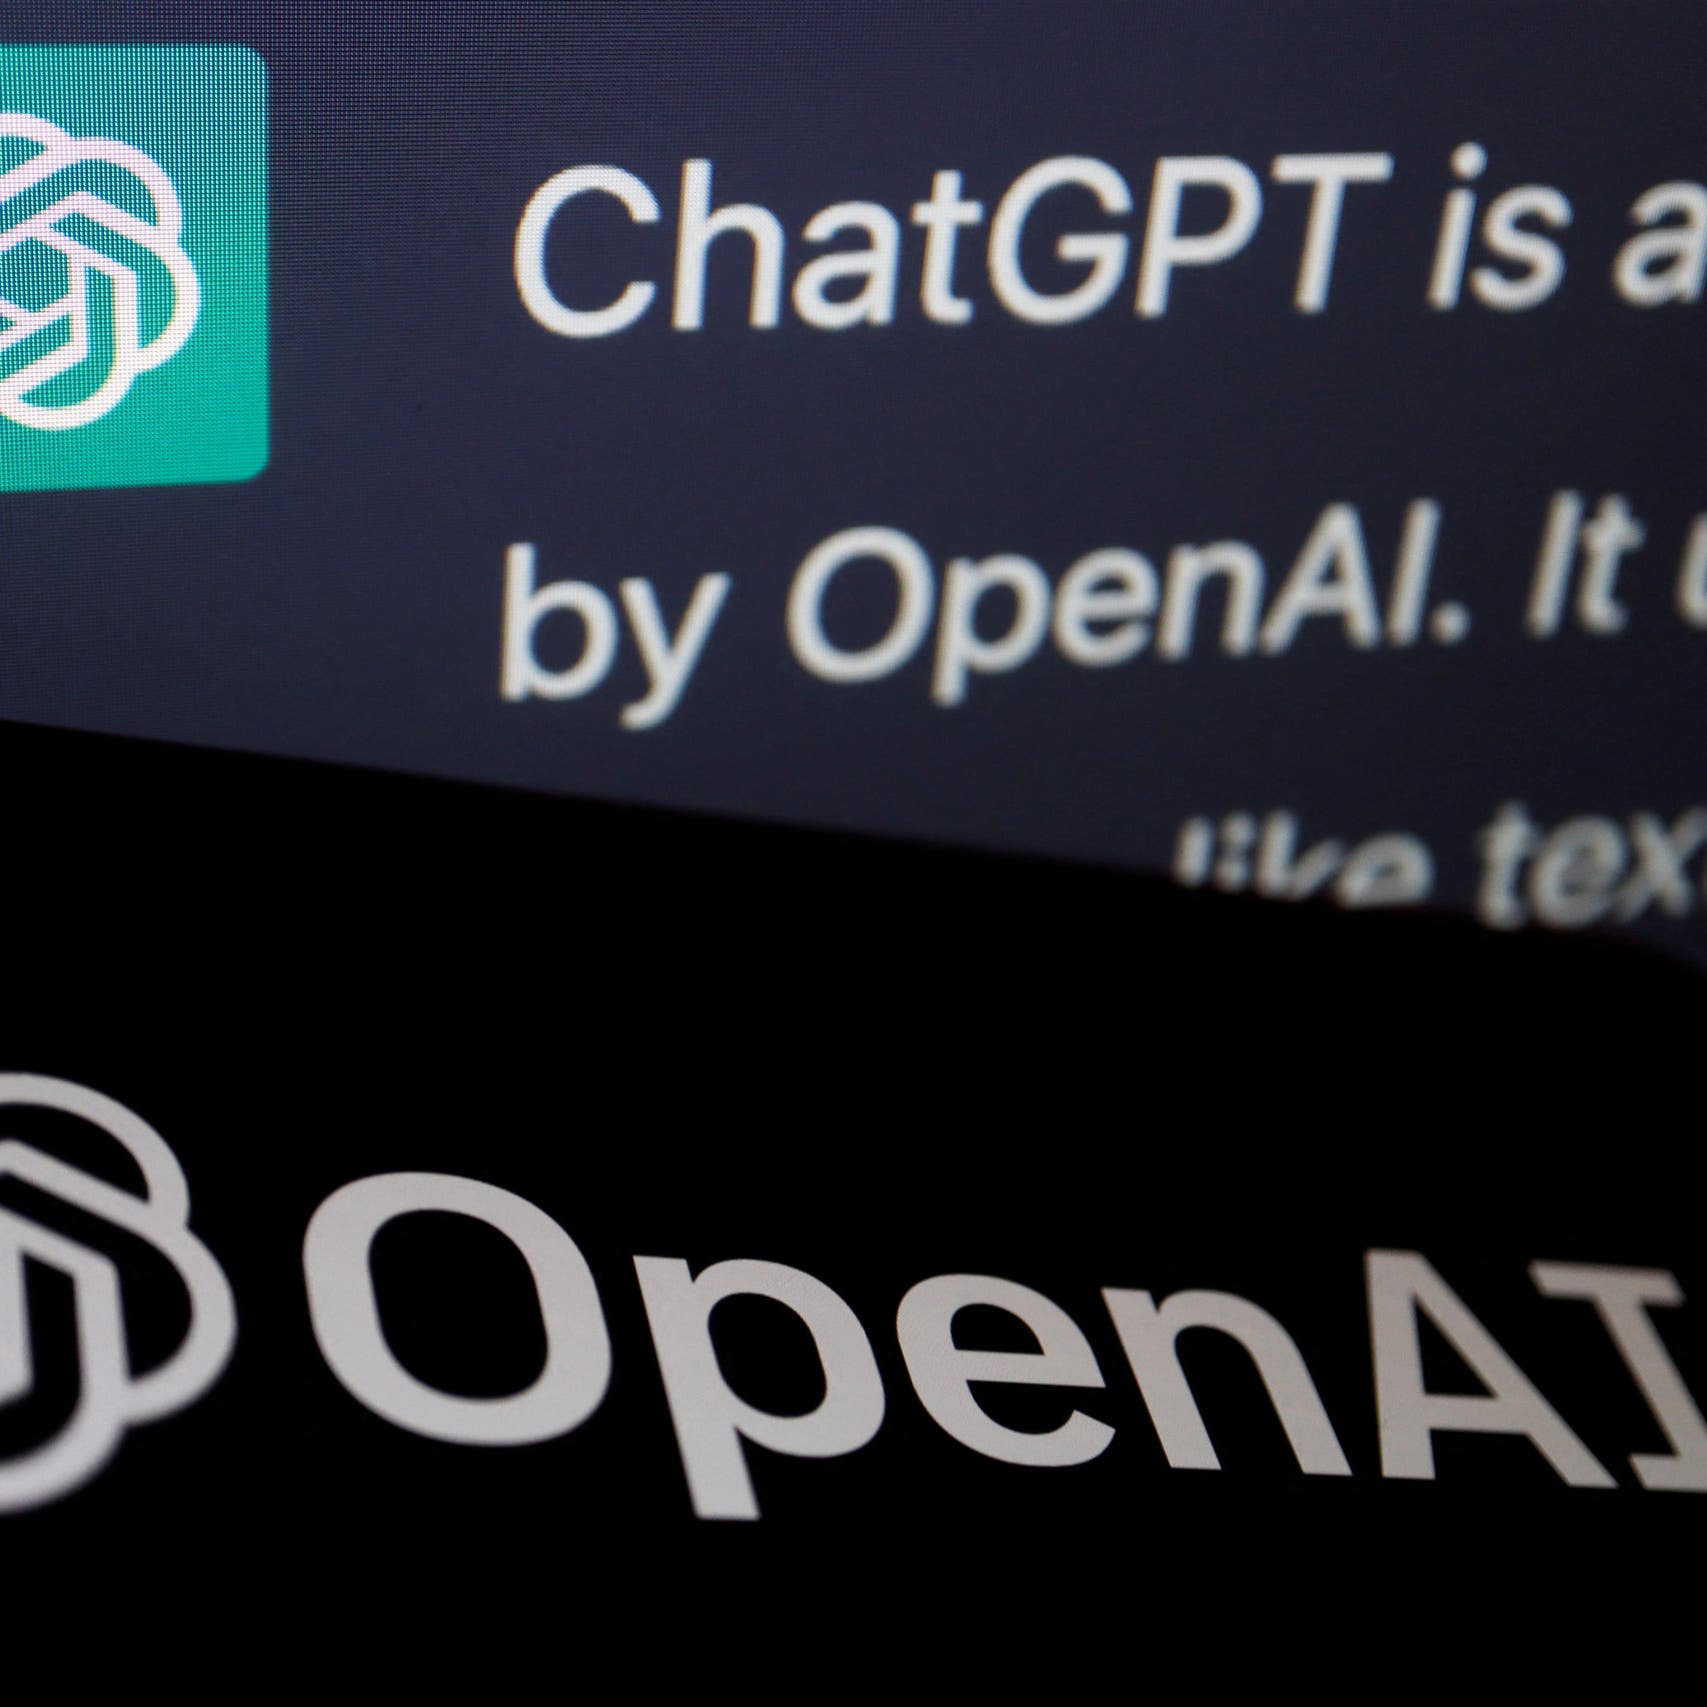 OpenAI’s ChatGPT Plus now available in UAE for $20 per month